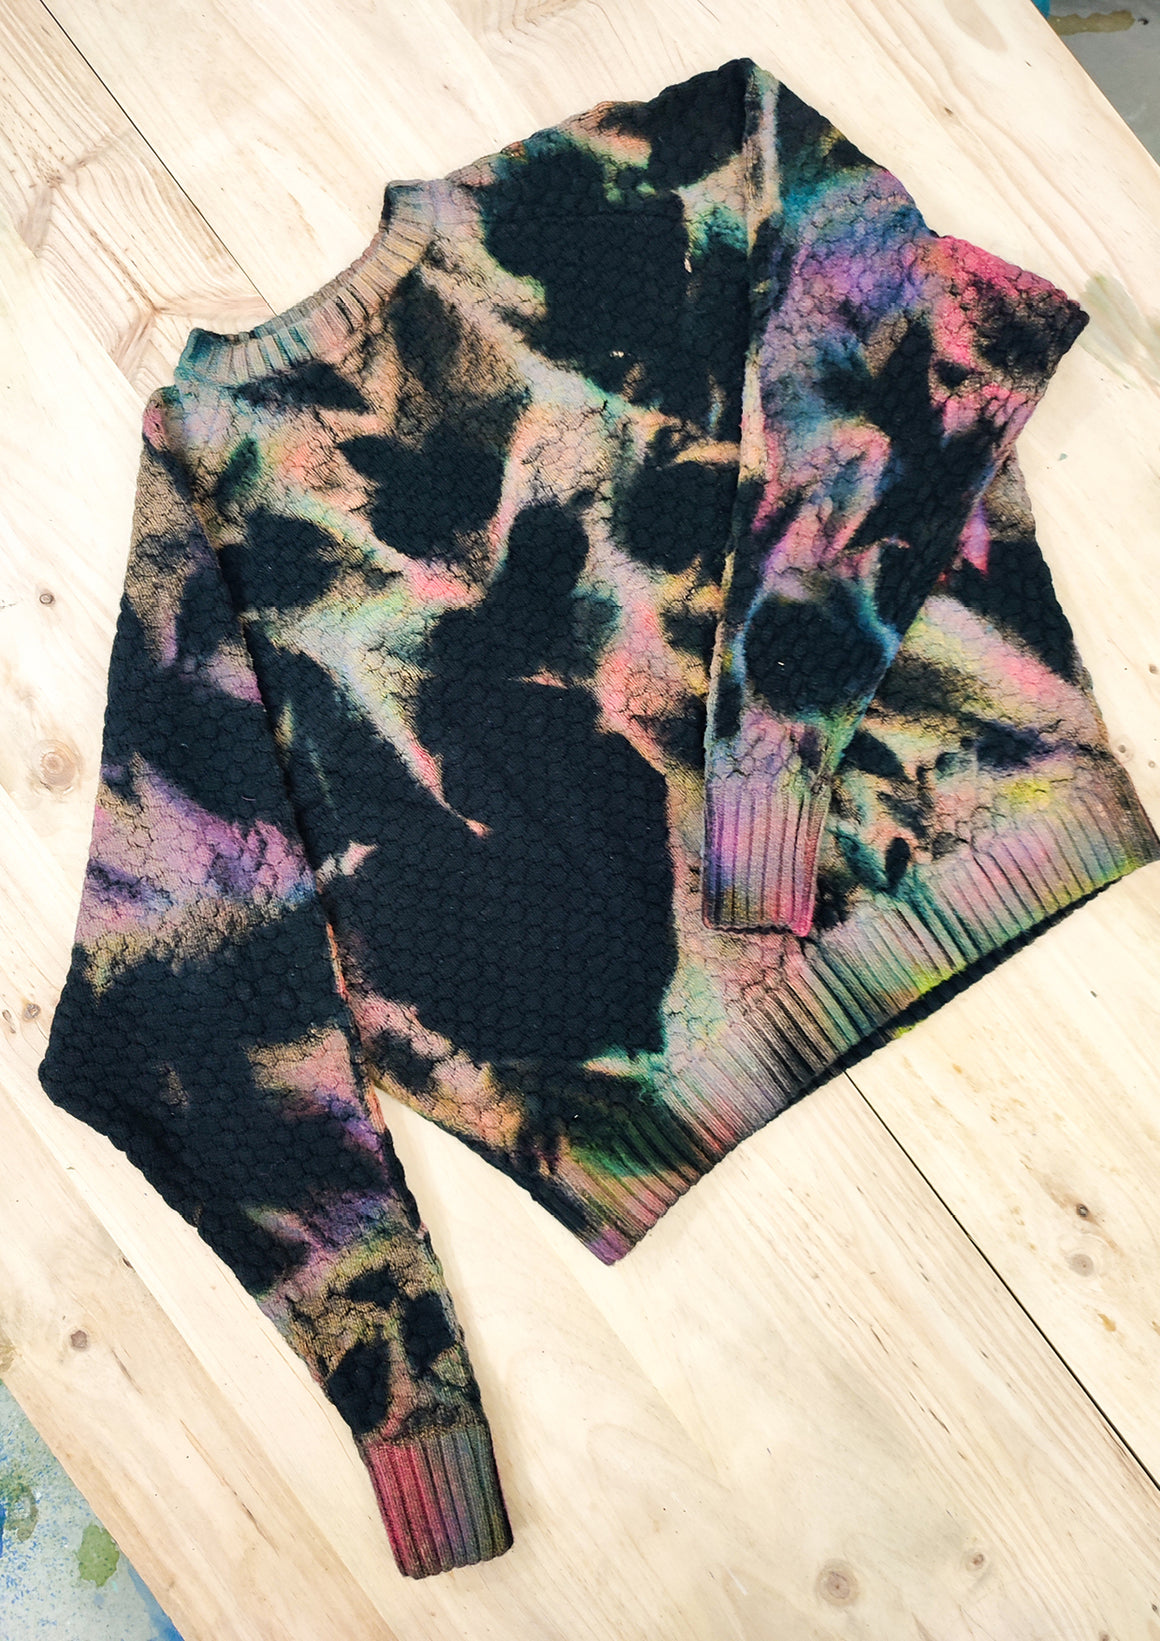 HANDPAINTED - SWEATER OVERSIZE - KNIT PEARL black painted